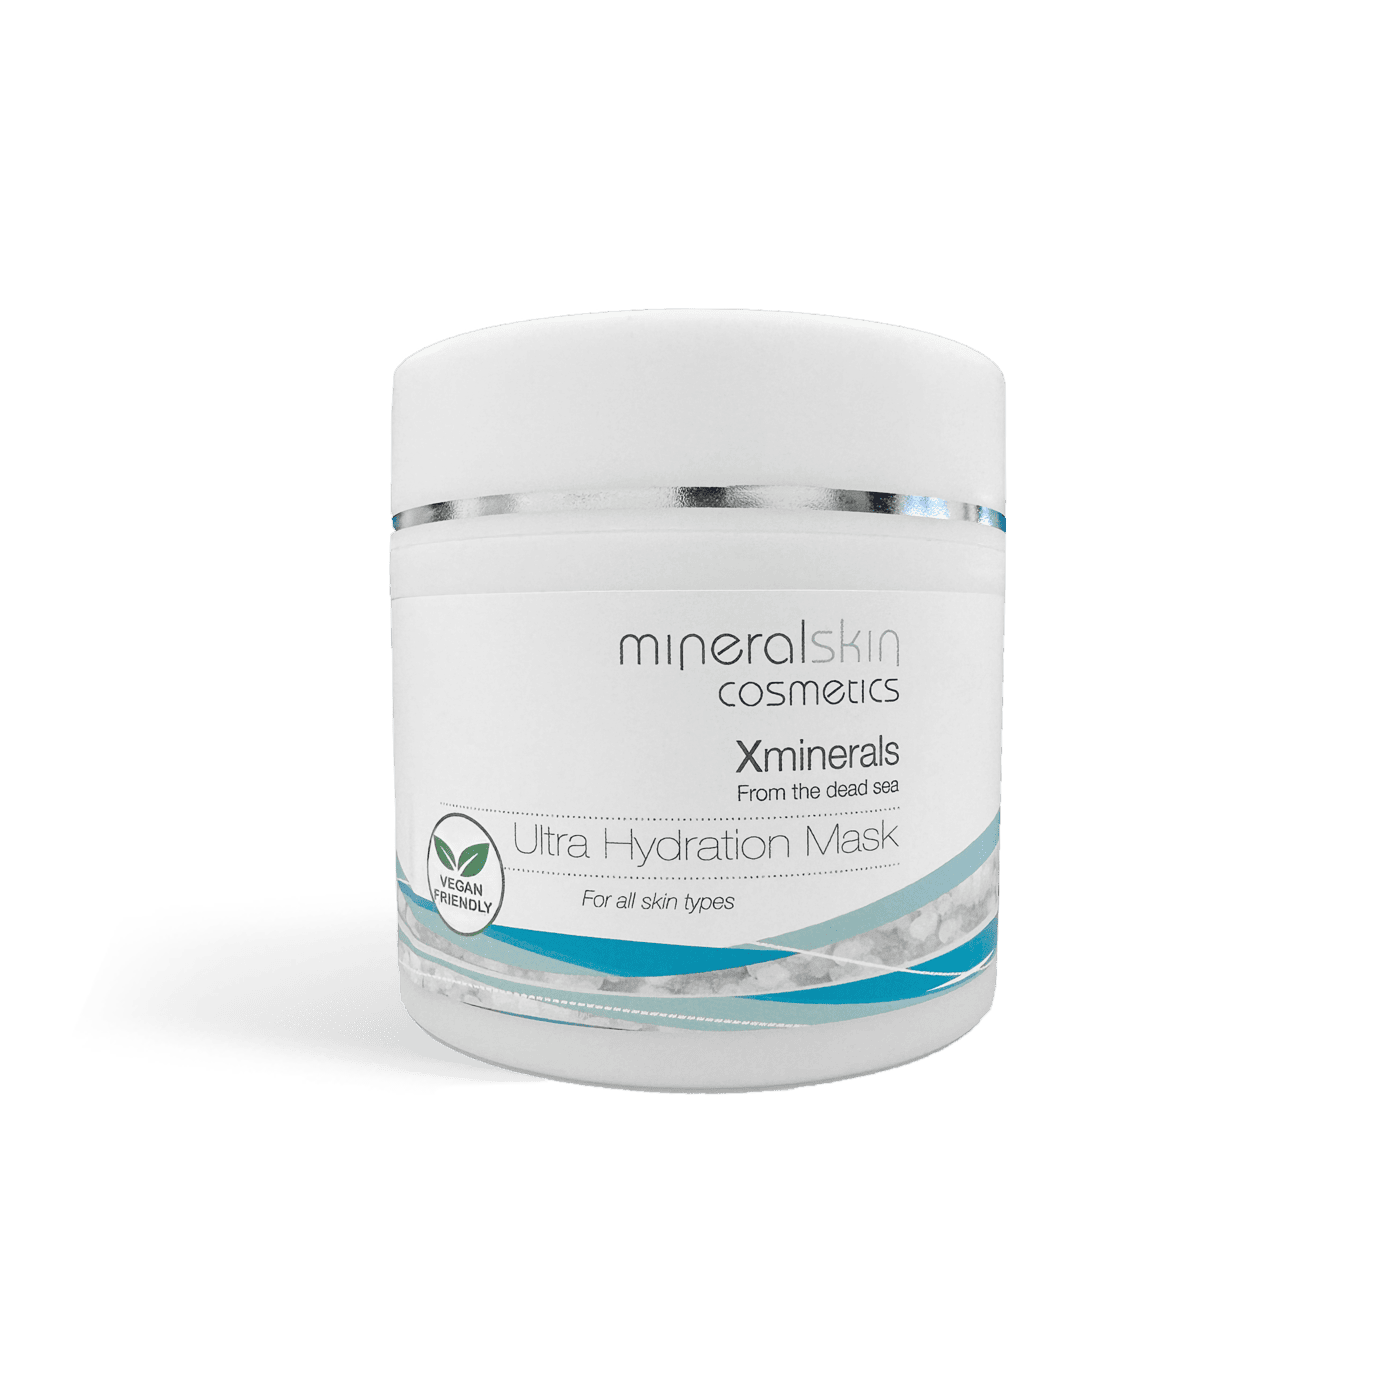 Xminerals Ultra Hydration Mask1